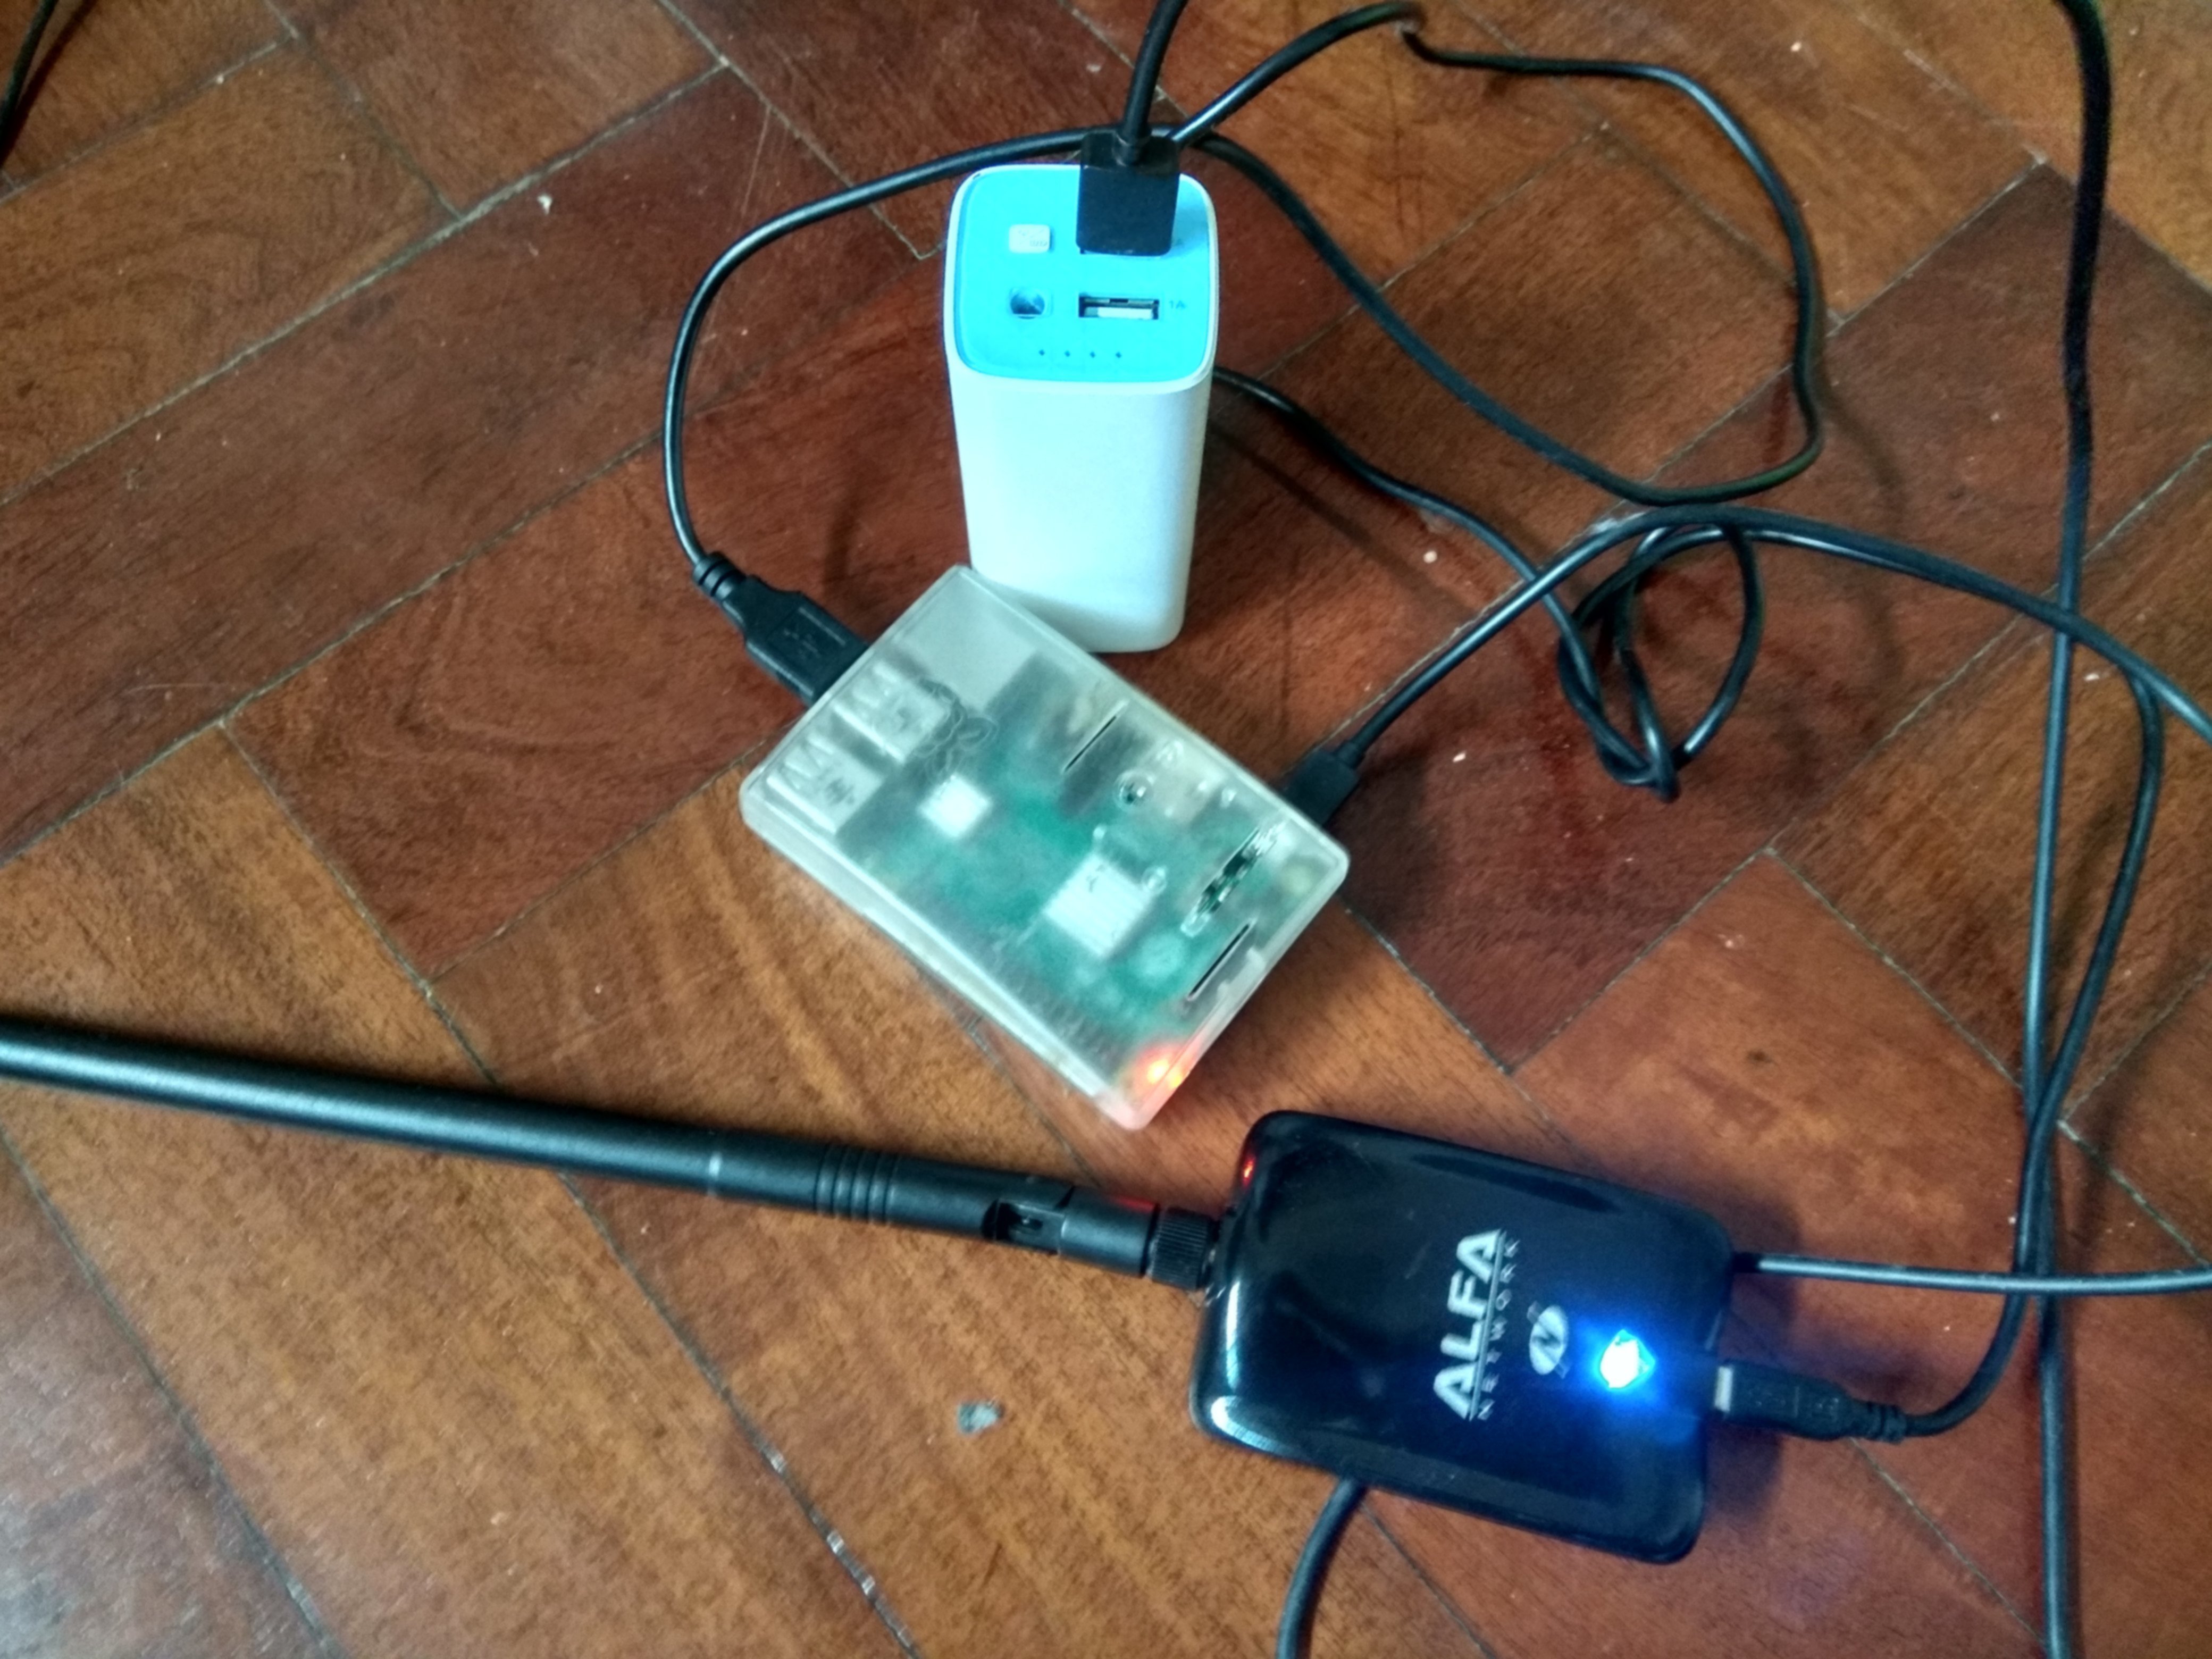 Raspberry pi running bettercap with alfa USB and tp link exteral battery